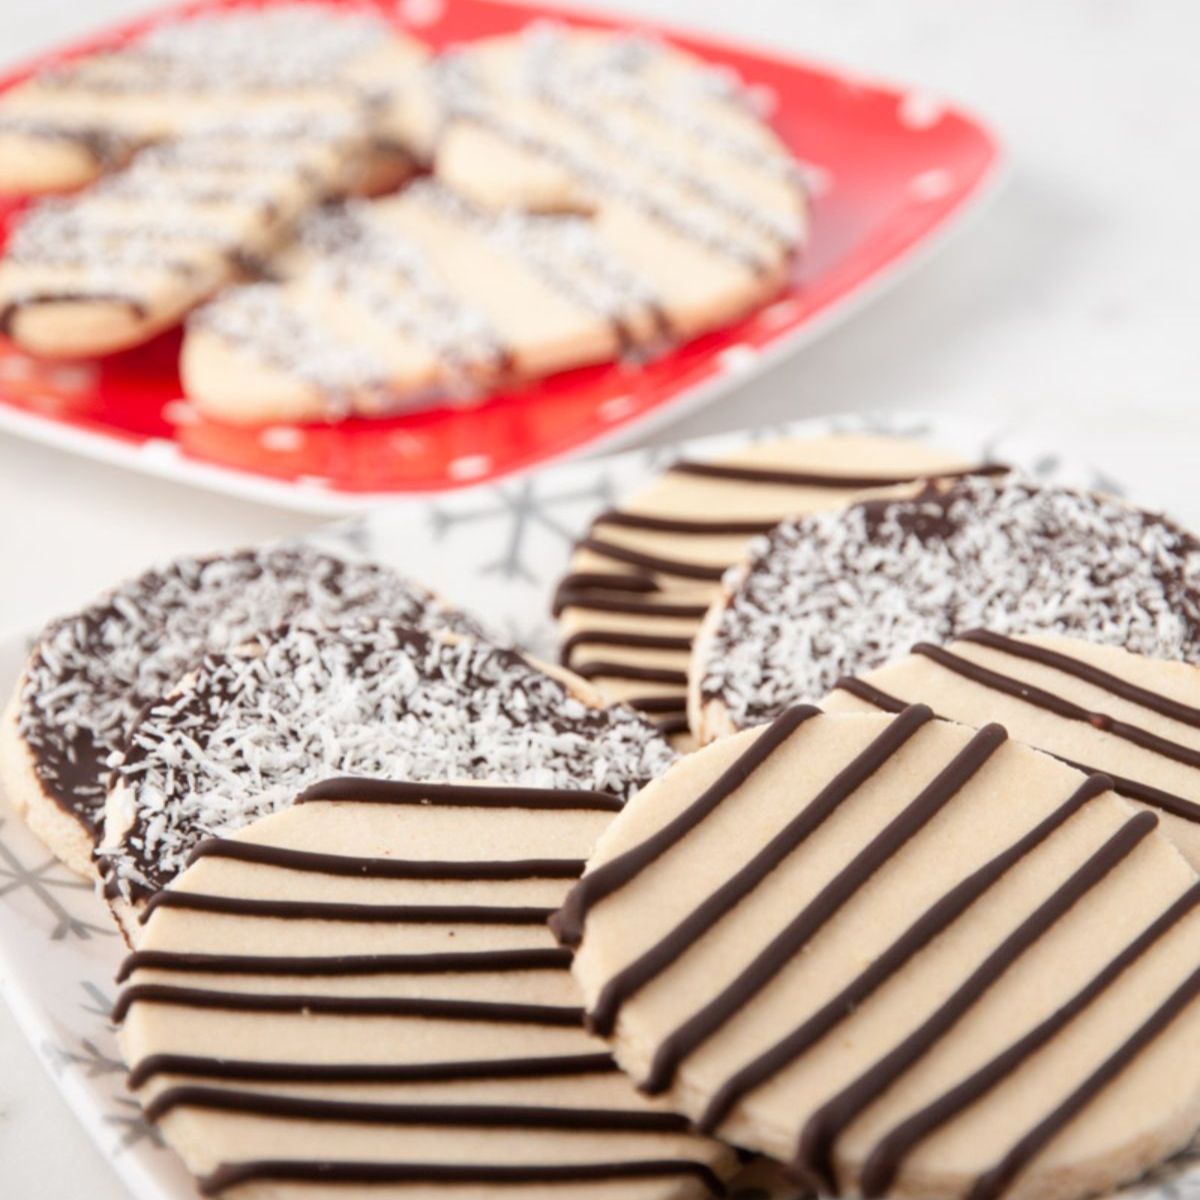 Shortbread Cookie featured